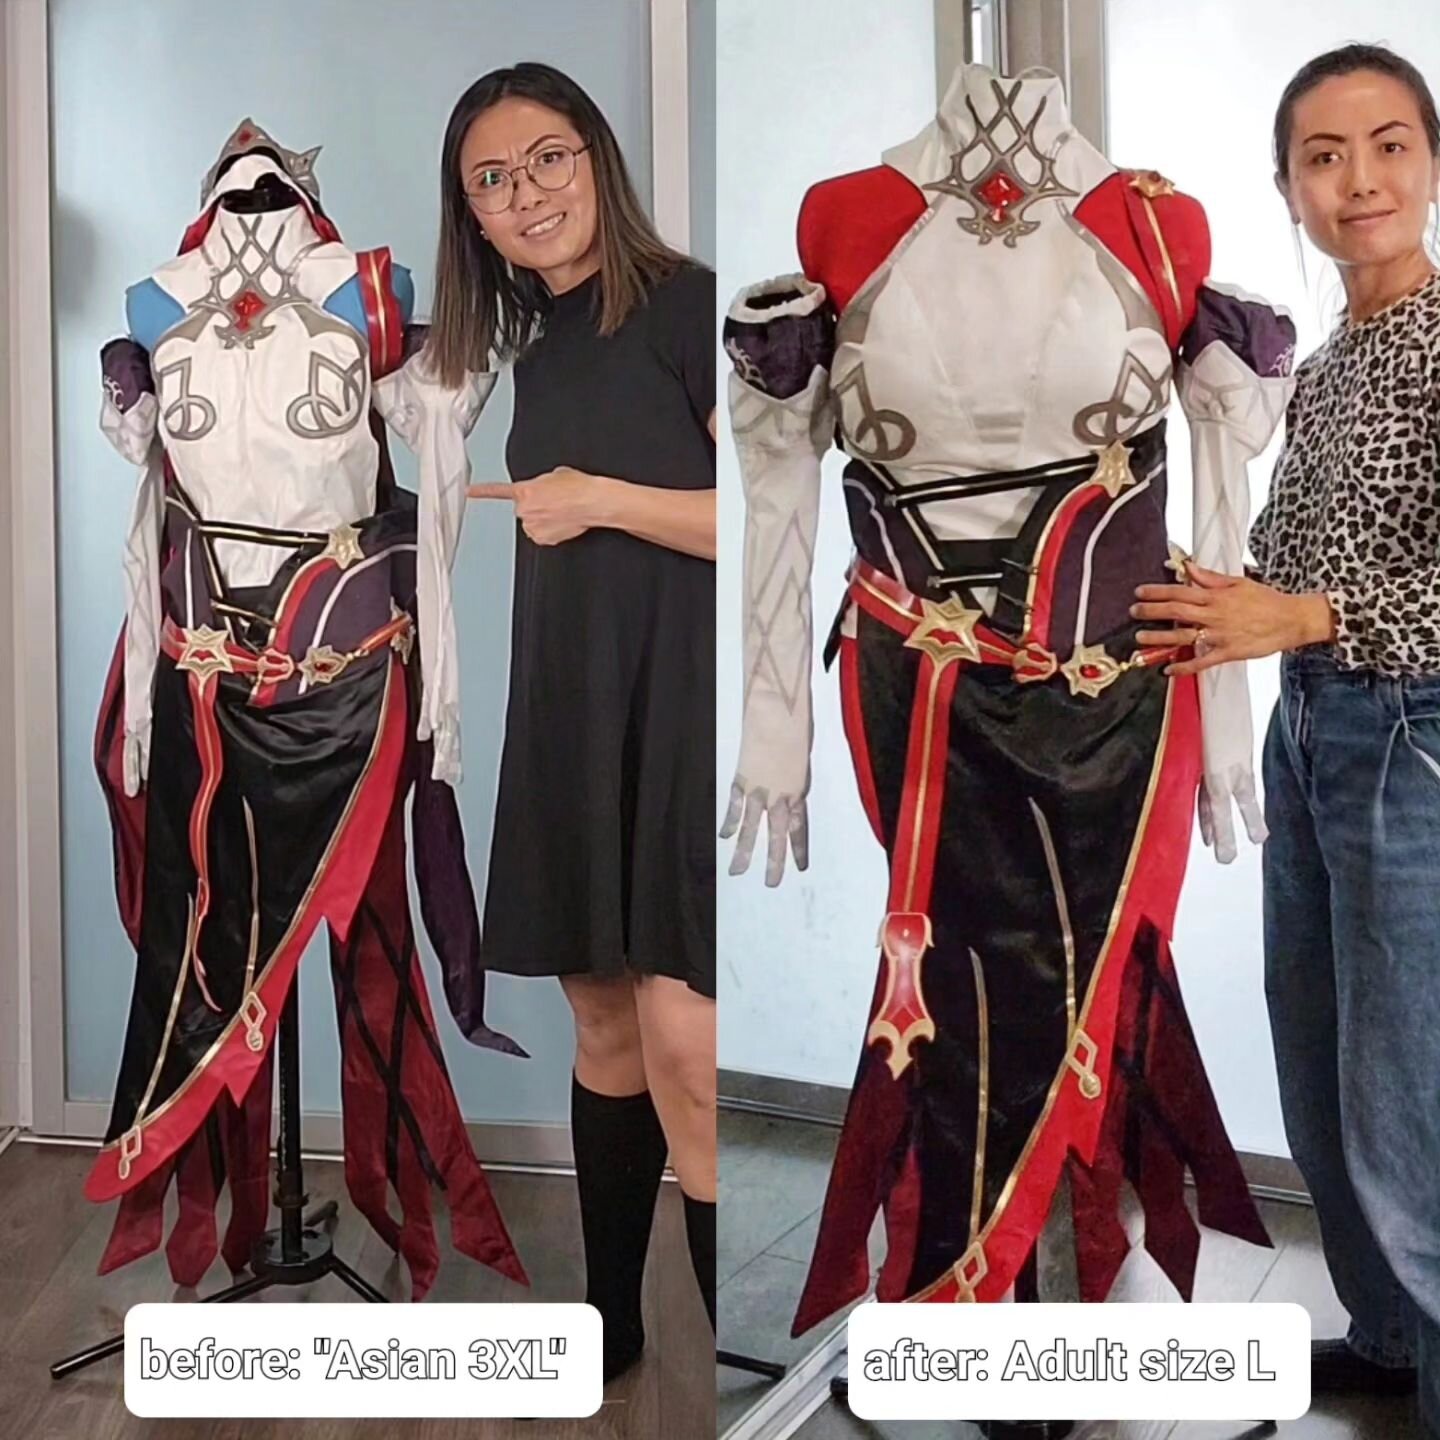 There's hope for your cosplay!! Wondering if you should purchase costumes from Asian factories? My advice is, GO IN WITH EYES WIDE OPEN. 

Reality is that the factories have unparalleled manufacturing capacities. If the factory doesn't want to make y